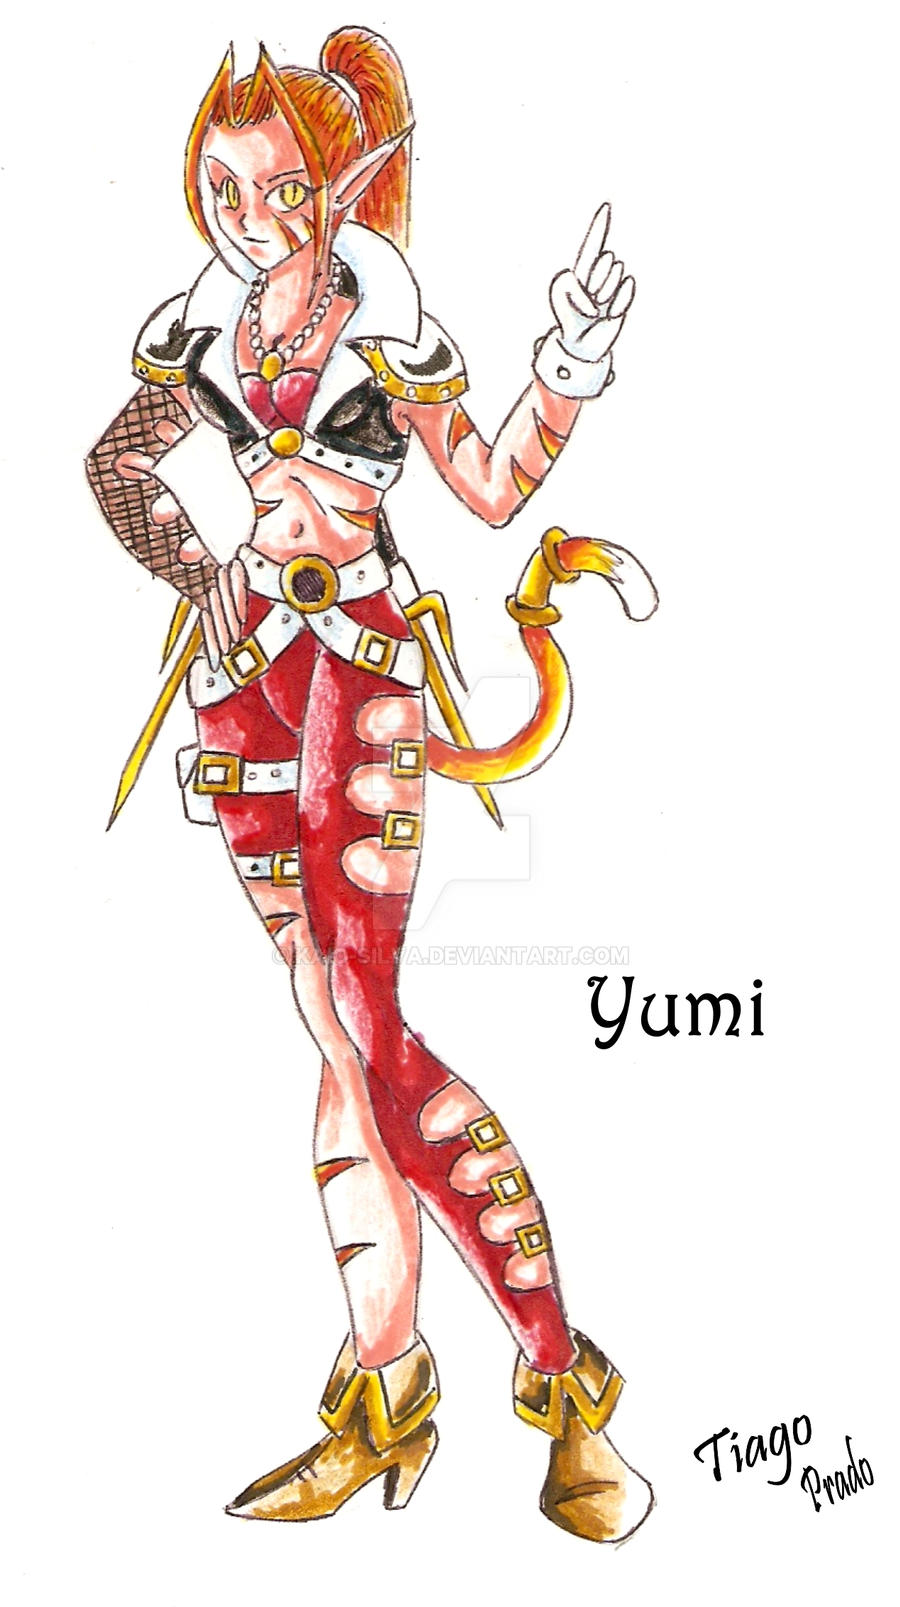 Yumi - All Rights Reserved.